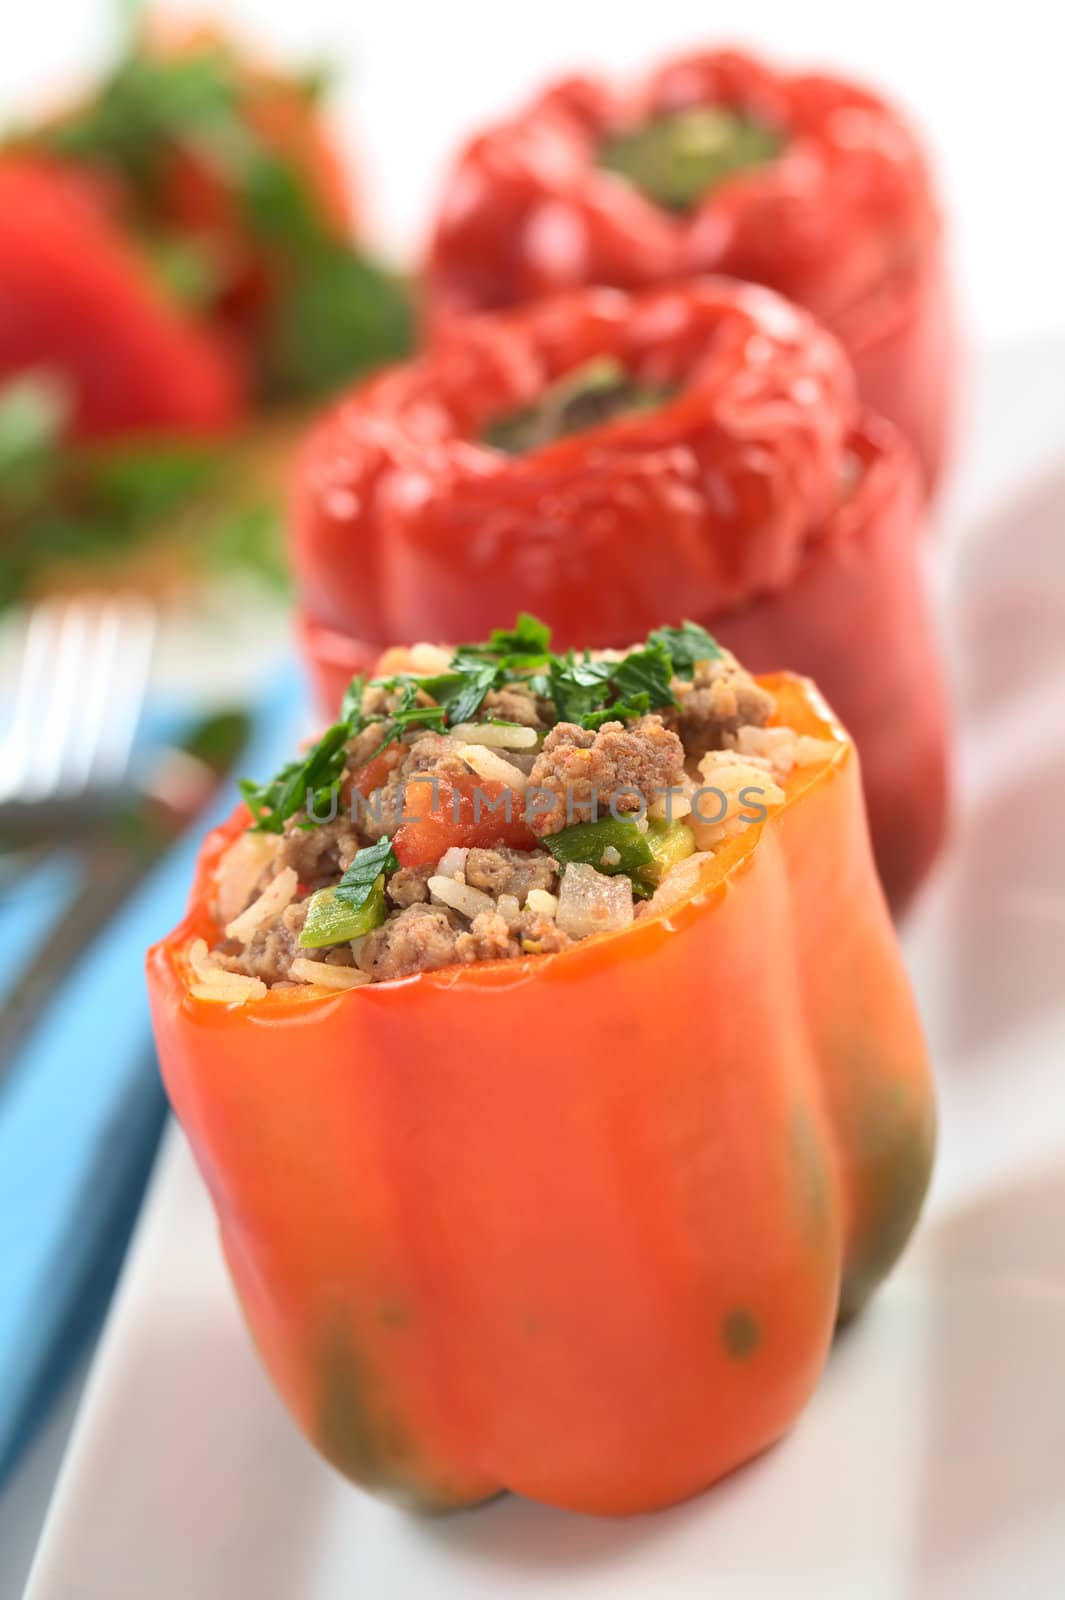 Baked stuffed red bell pepper filled with ground meat, onion, rice, tomato and green onion garnished with parsley served on a long plate (Selective Focus, Focus on the tomato piece and the stuffing around it on the top)